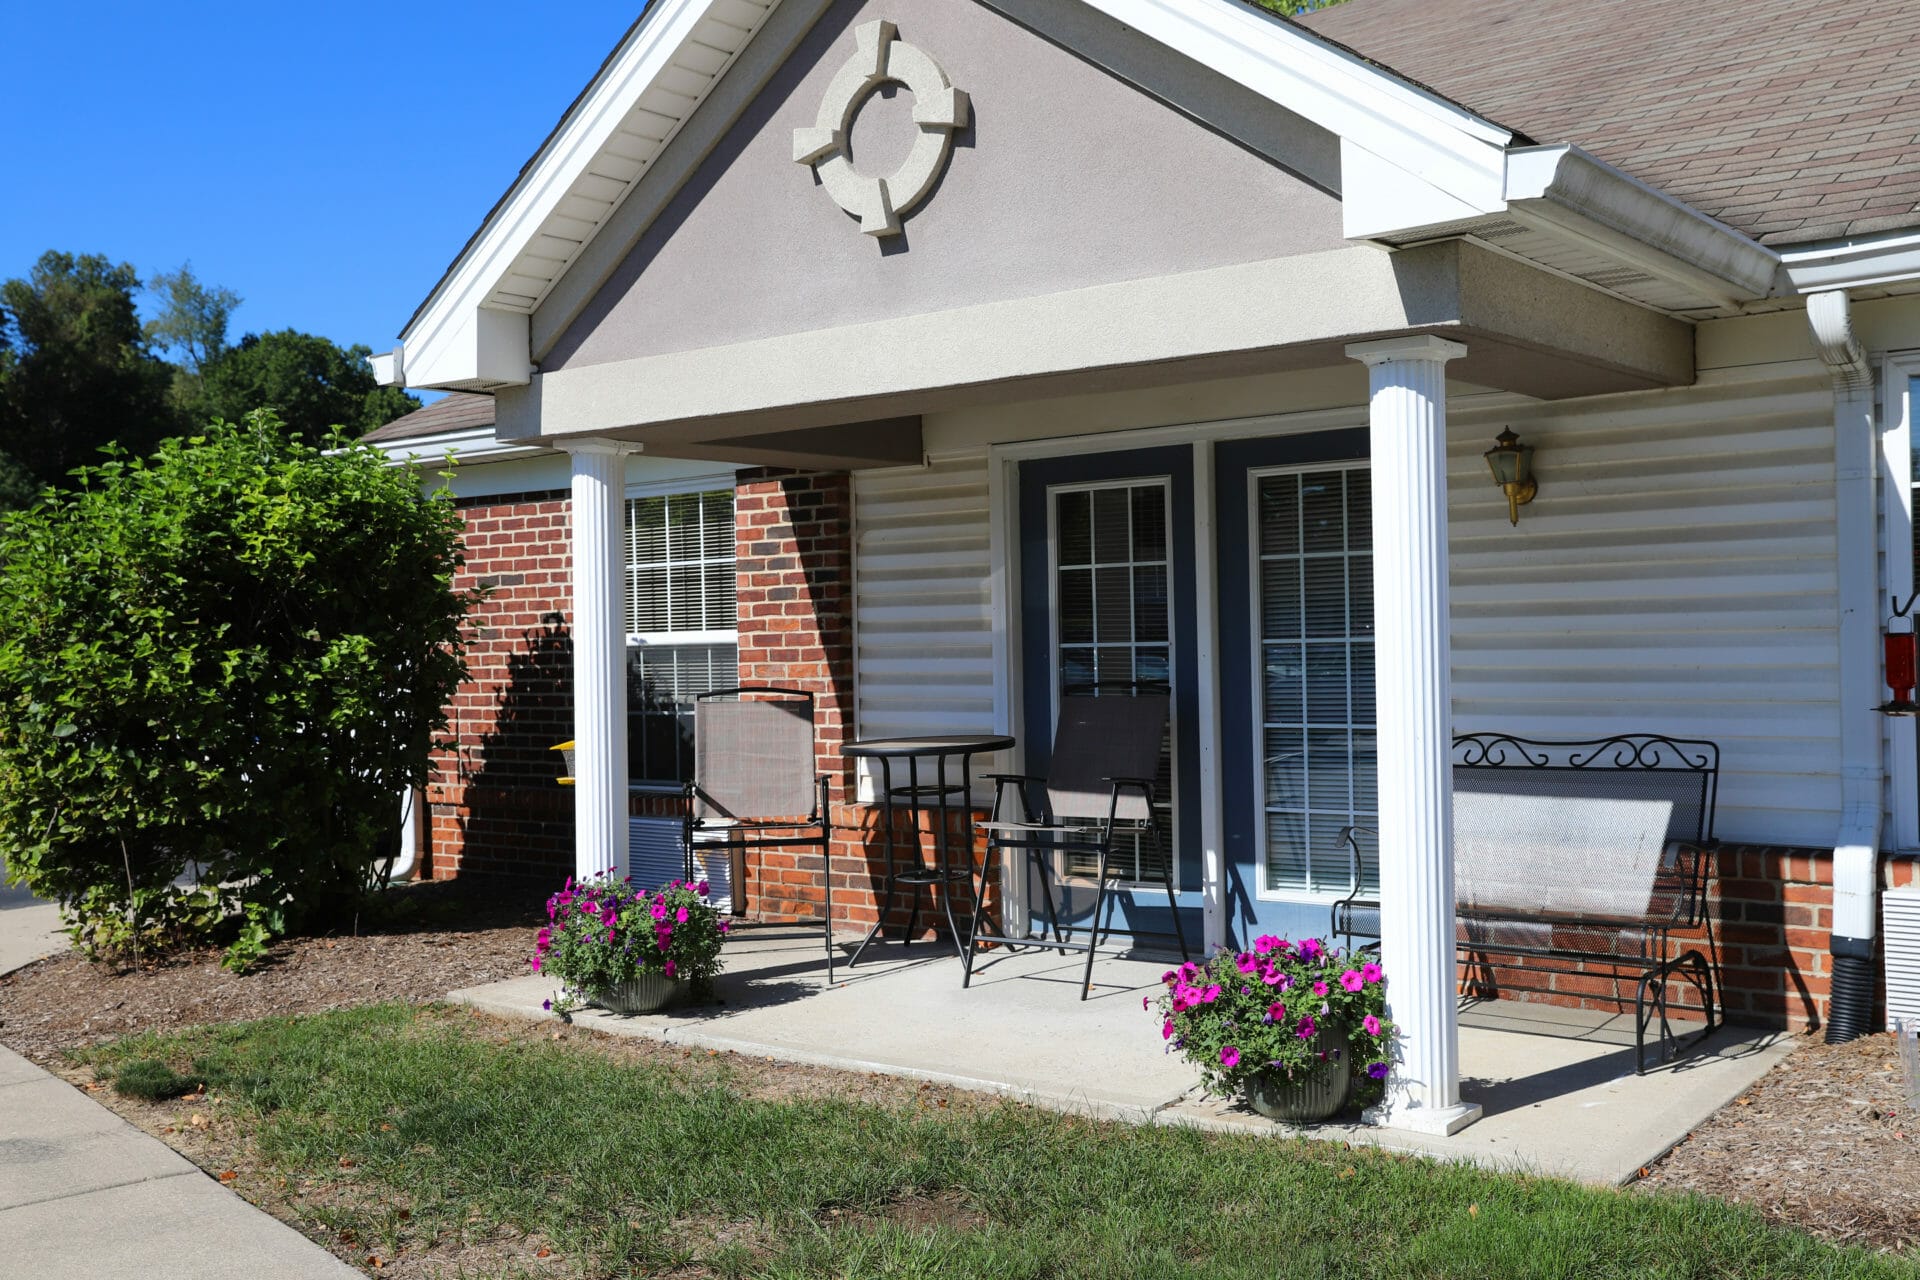 <span  class="uc_style_uc_tiles_grid_image_elementor_uc_items_attribute_title" style="color:#000000;">The Meadow Lakes apartment features a welcoming front porch with seating and charming flower pots lining the perimeter.</span>